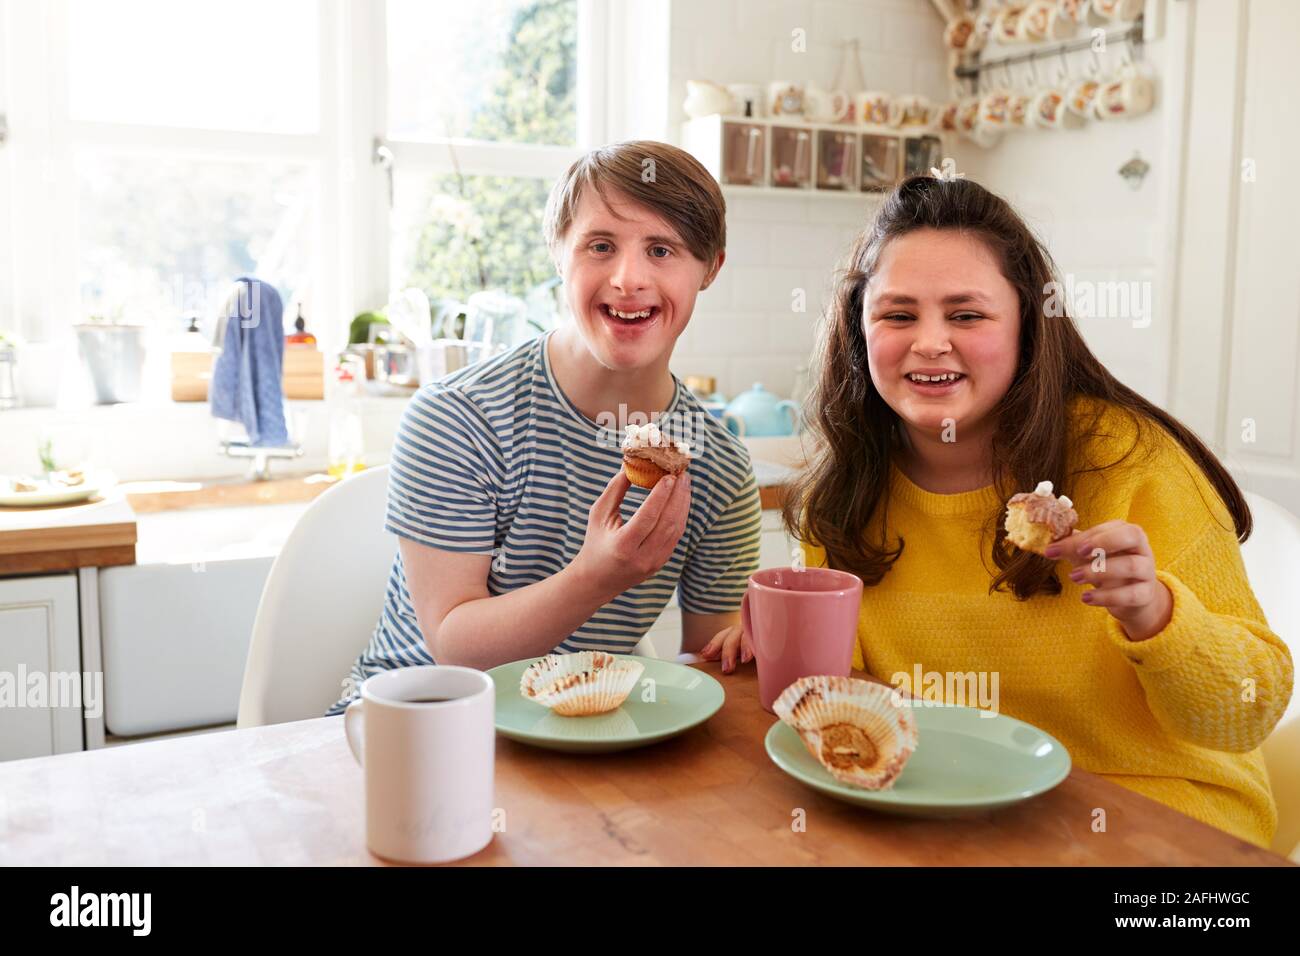 Portrait Of Young Downs Syndrome Couple Enjoying Tea And Cake In Kitchen At Home Stock Photo